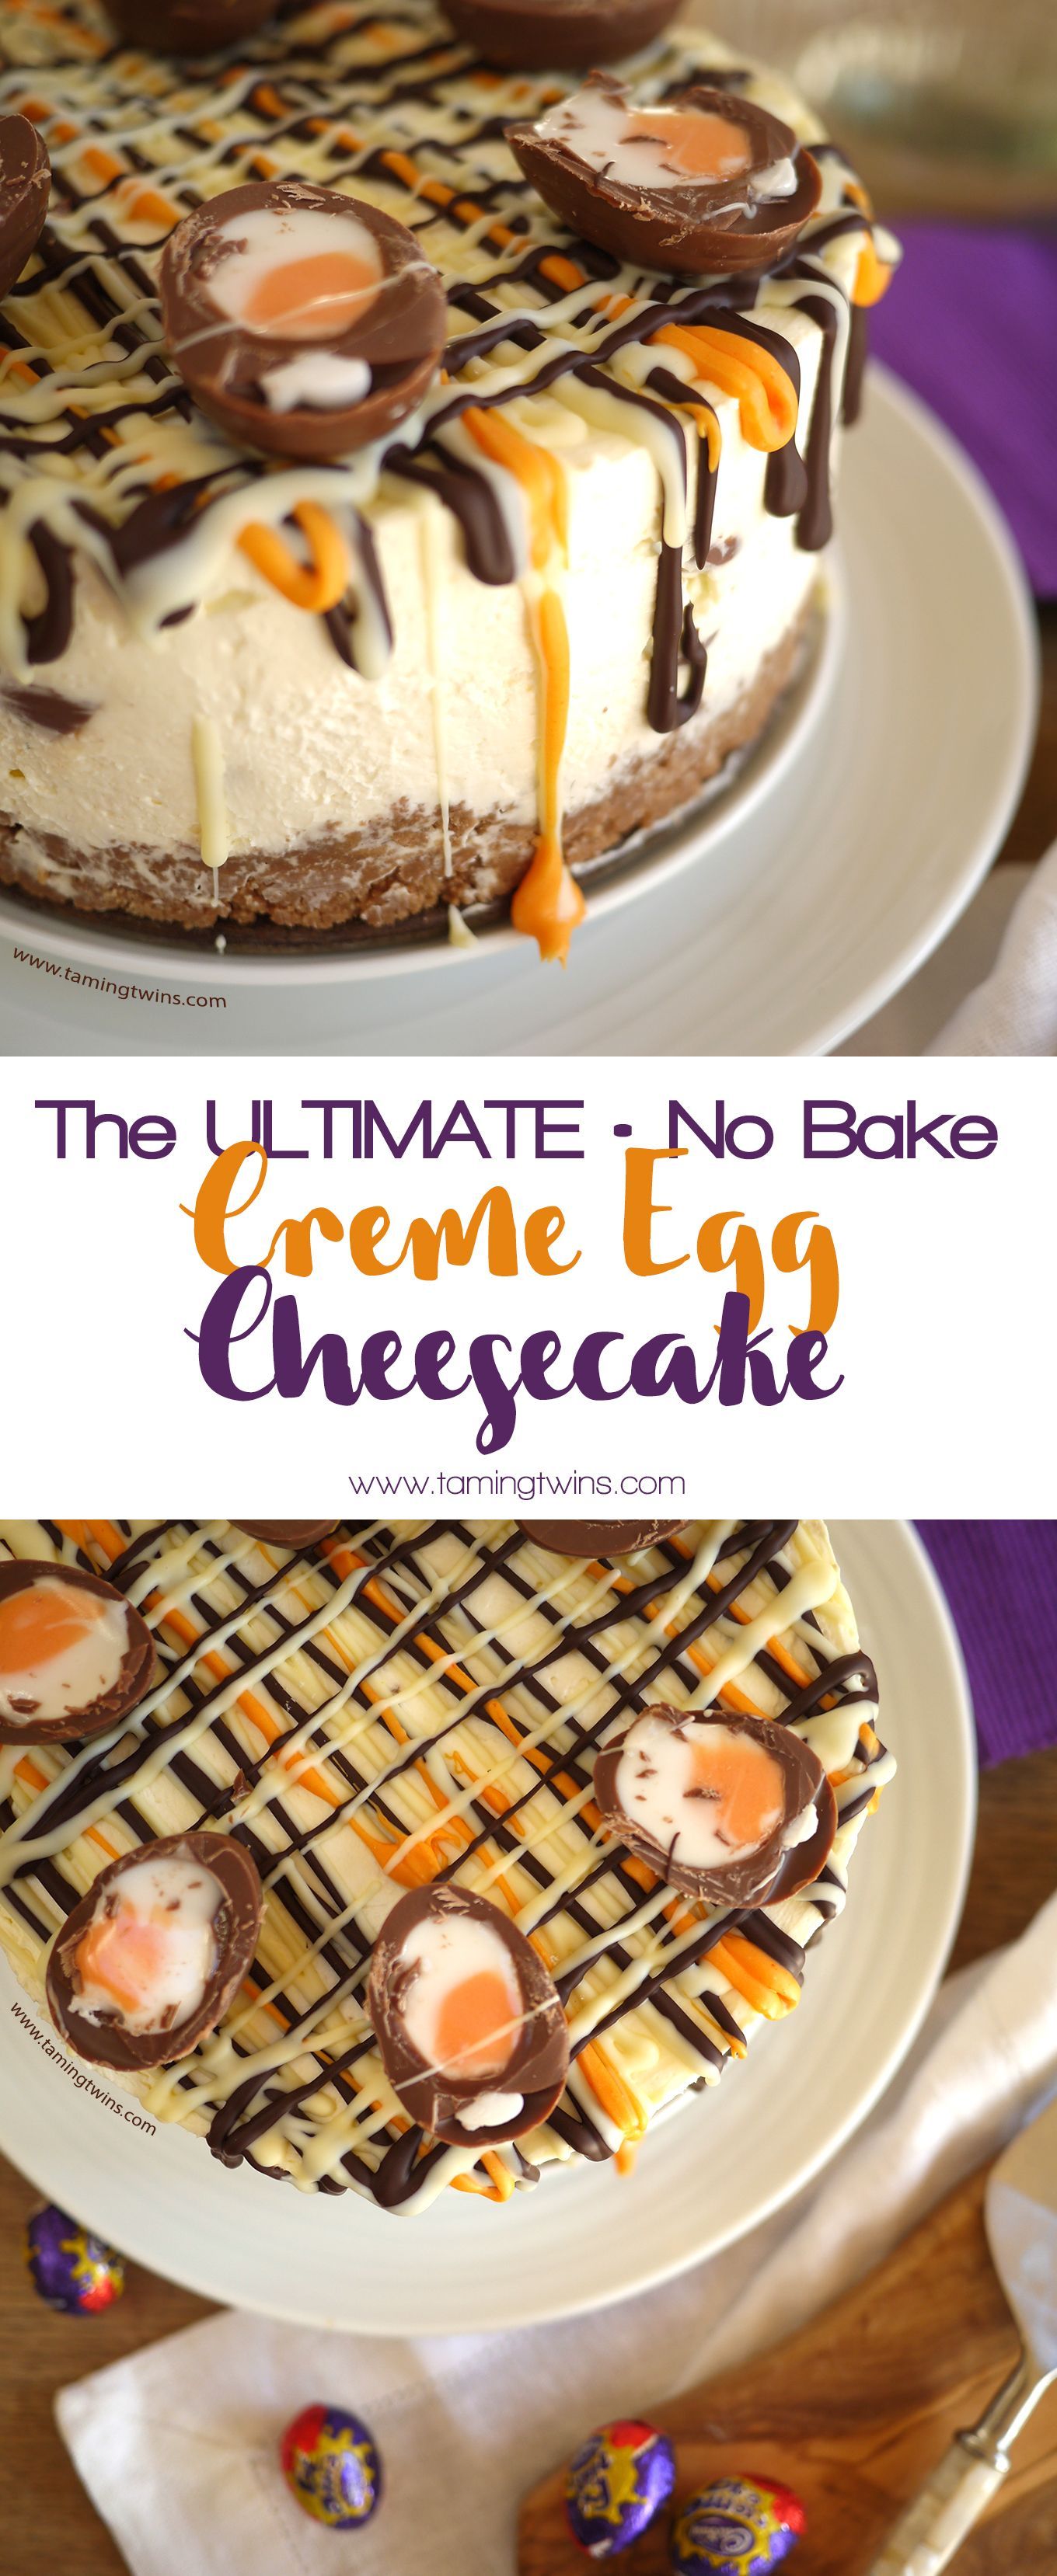 This Cadburys Creme Egg Cheesecake Recipe (No Bake!) has been viewed over a million times. The ultimate Easter chocolate make,